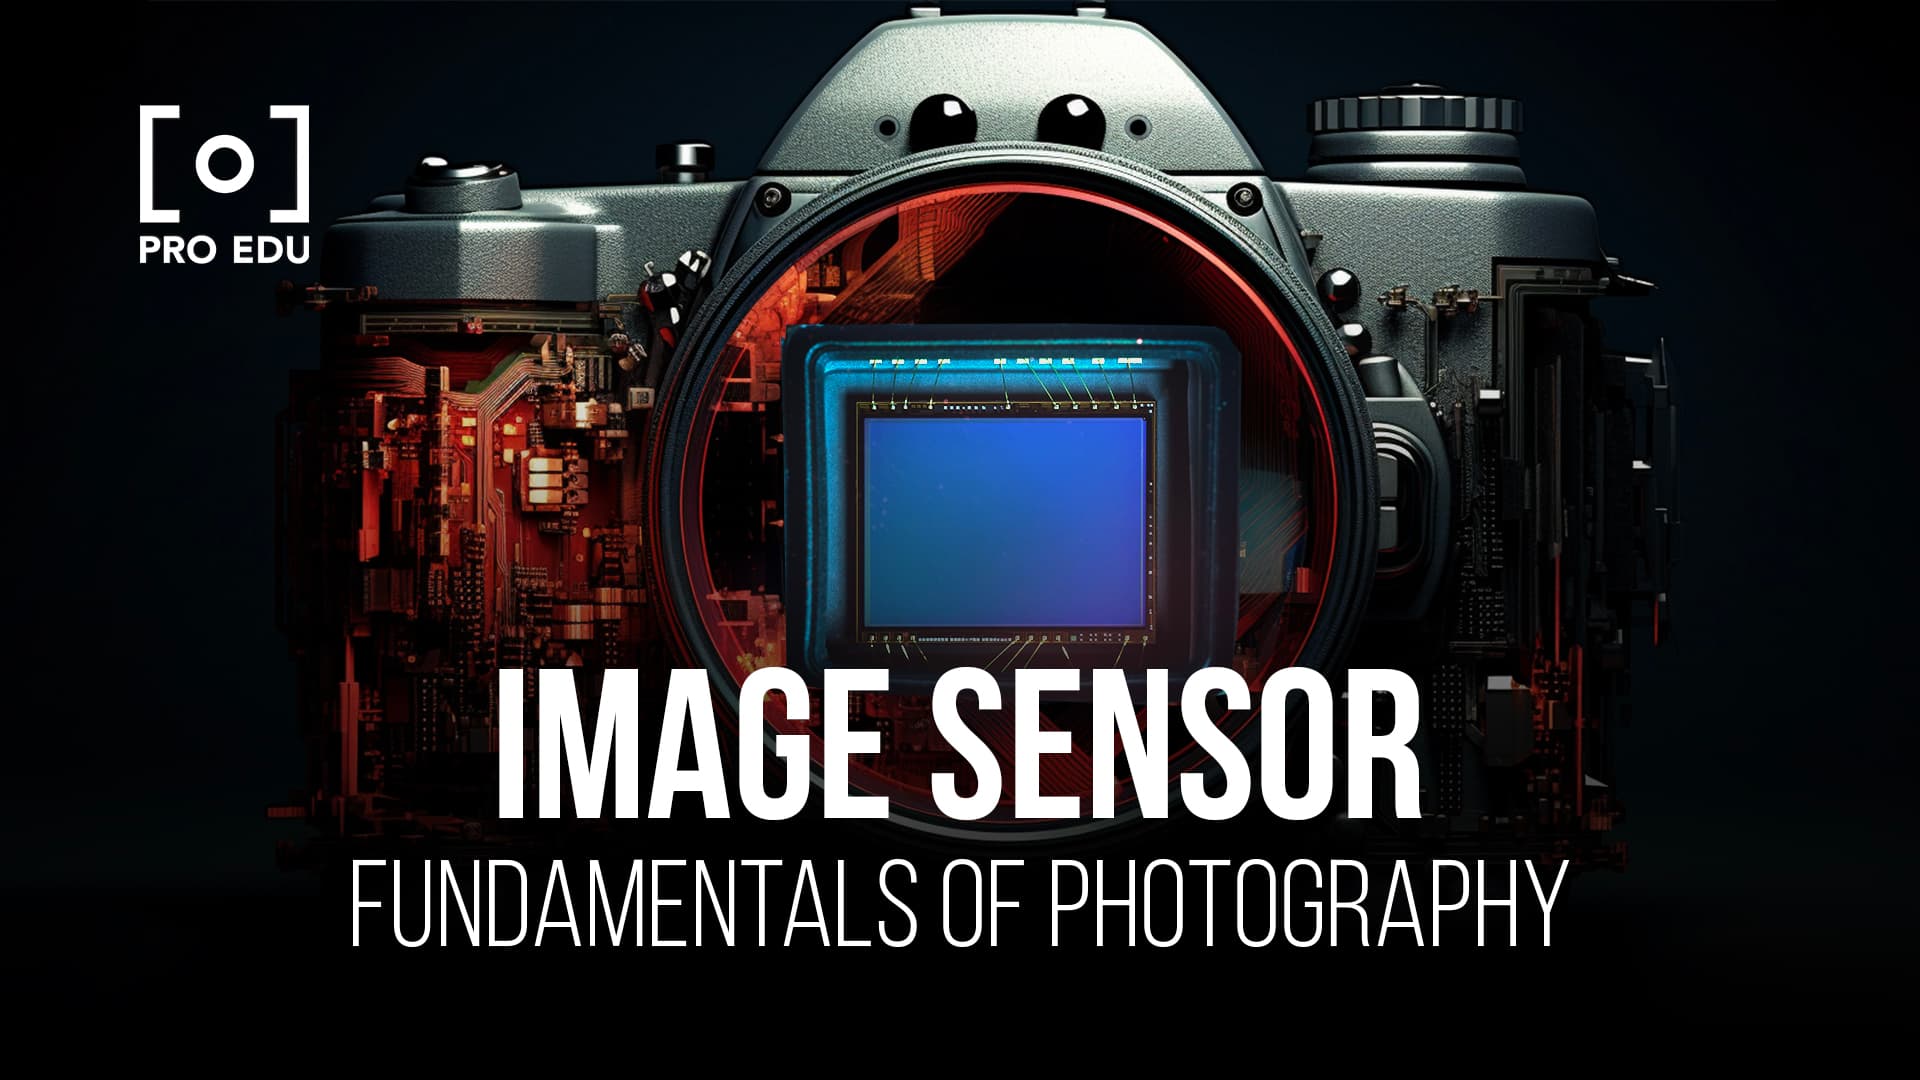 The heart of digital cameras: Understanding image sensors for improved photography